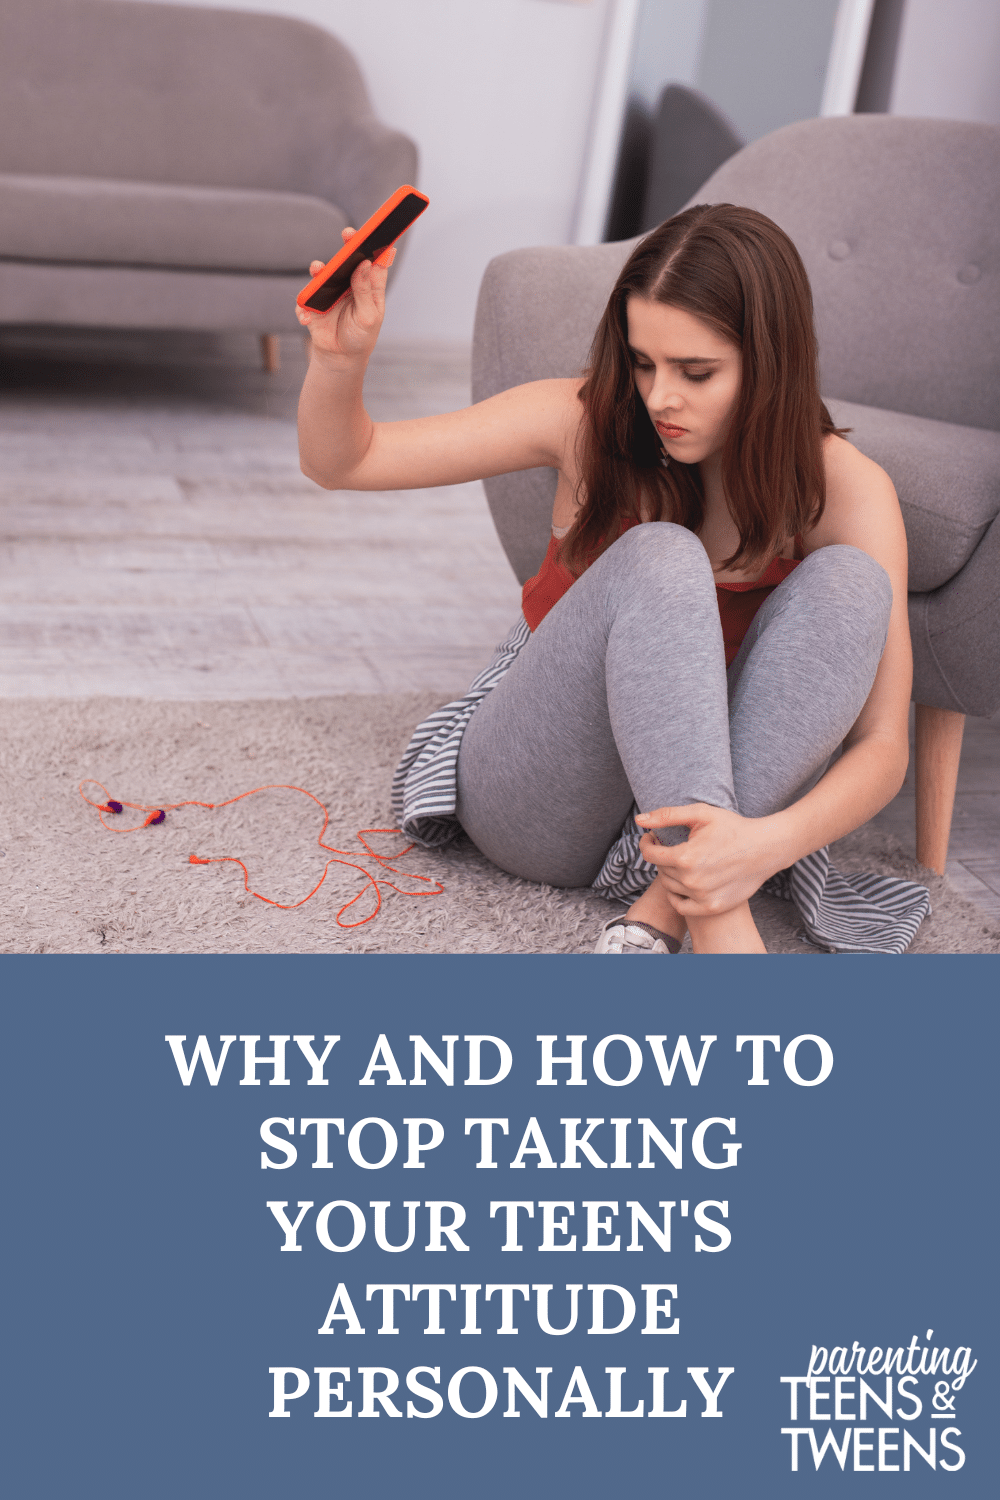 Why And How To Stop Taking Your Teen's Attitude Personally